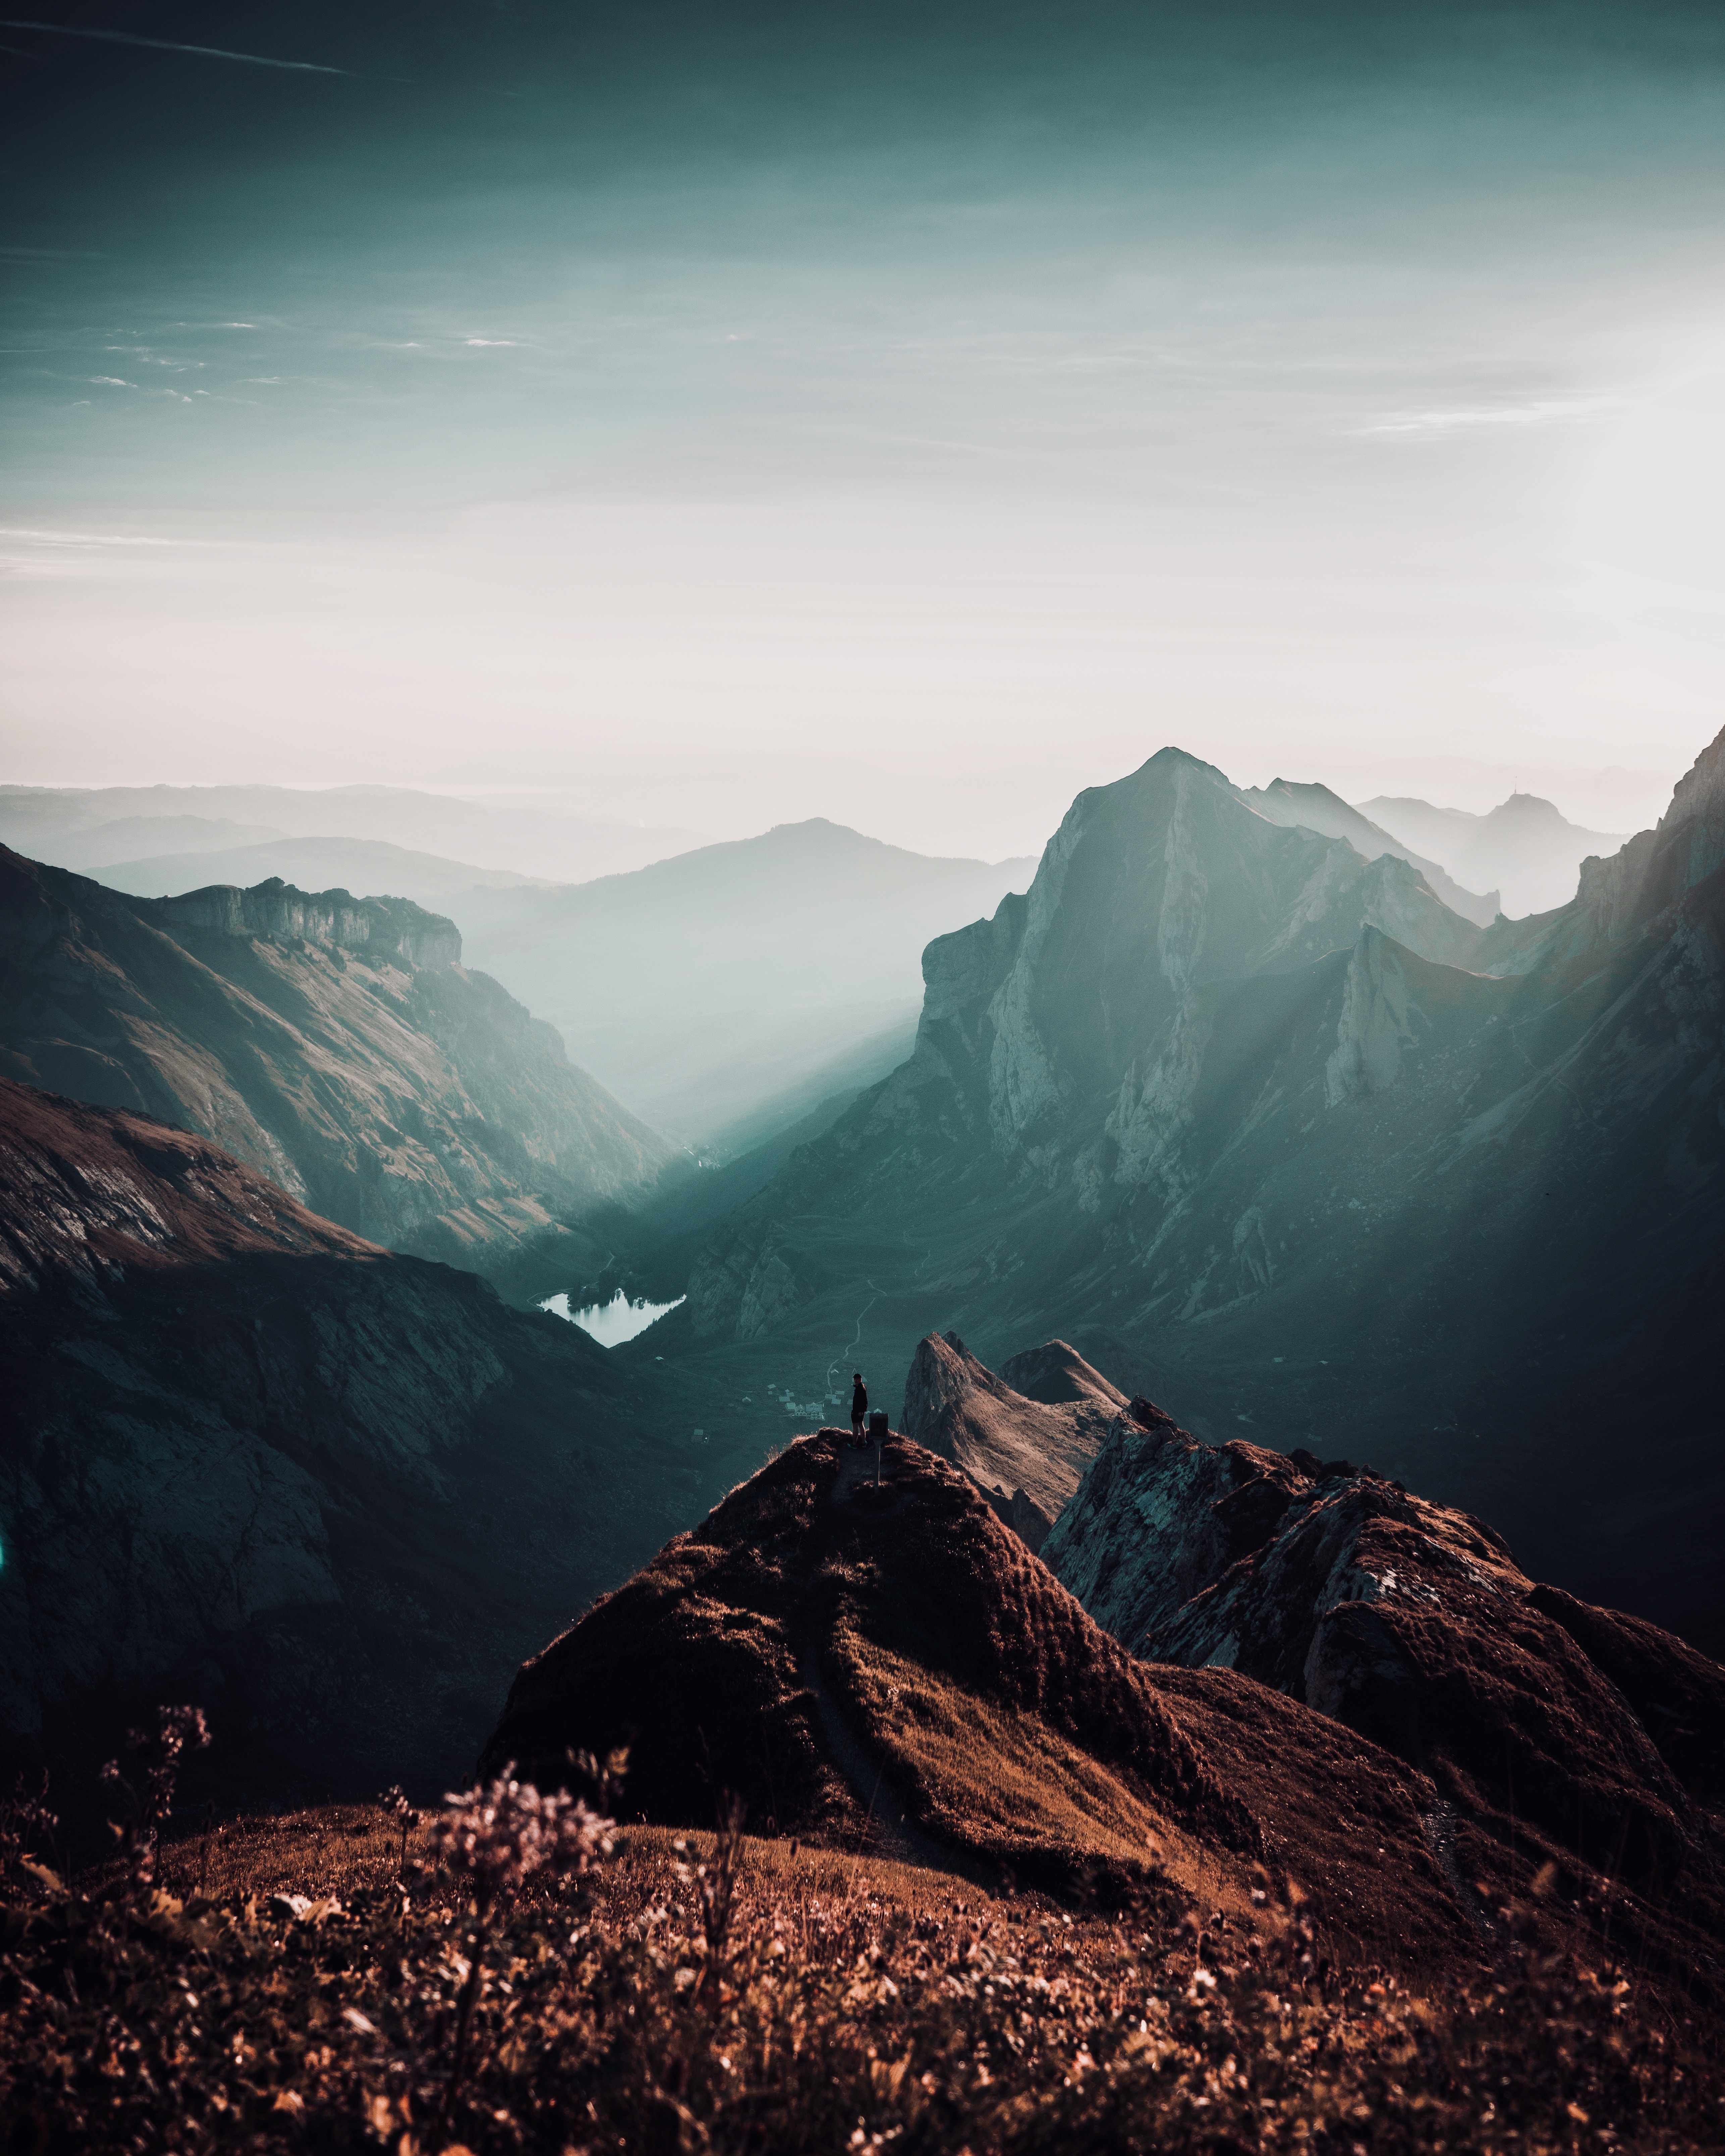 tops, loneliness, nature, privacy, mountains, vertex, seclusion, switzerland High Definition image